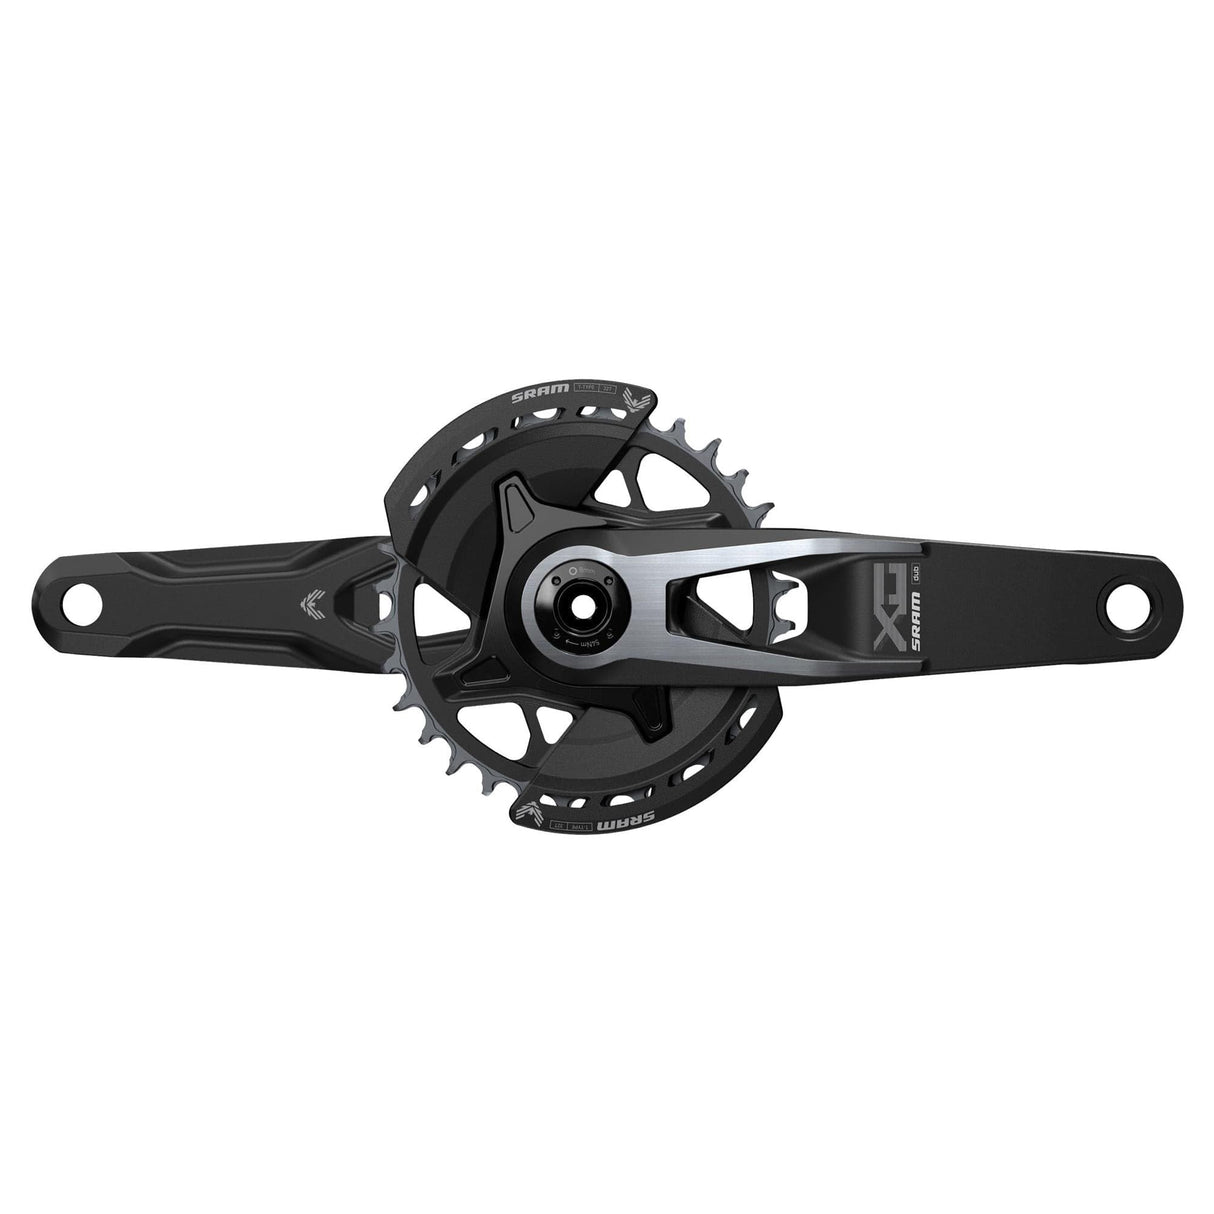 Sram Crankset X0 Eagle Q174 55Mm Chainline Dub Mtb Wide 2-Guards 32T T-Type (Bb & Bb Dub Spacers Are Not Included) V2:  170Mm